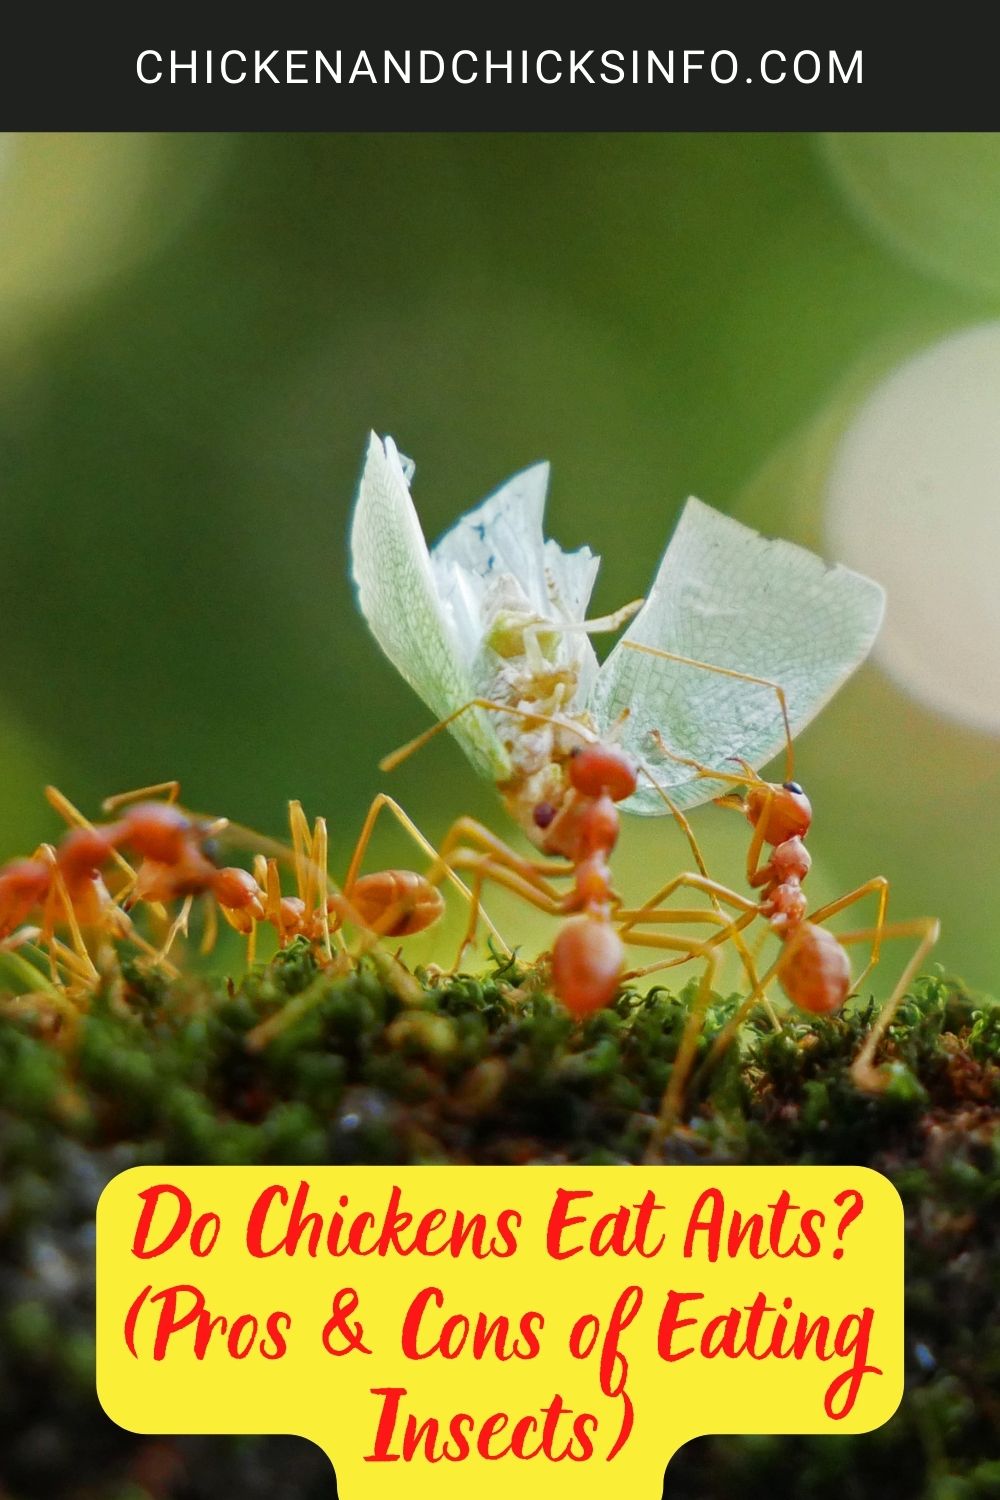 Do Chickens Eat Ants? (Pros & Cons of Eating Insects) poster.
